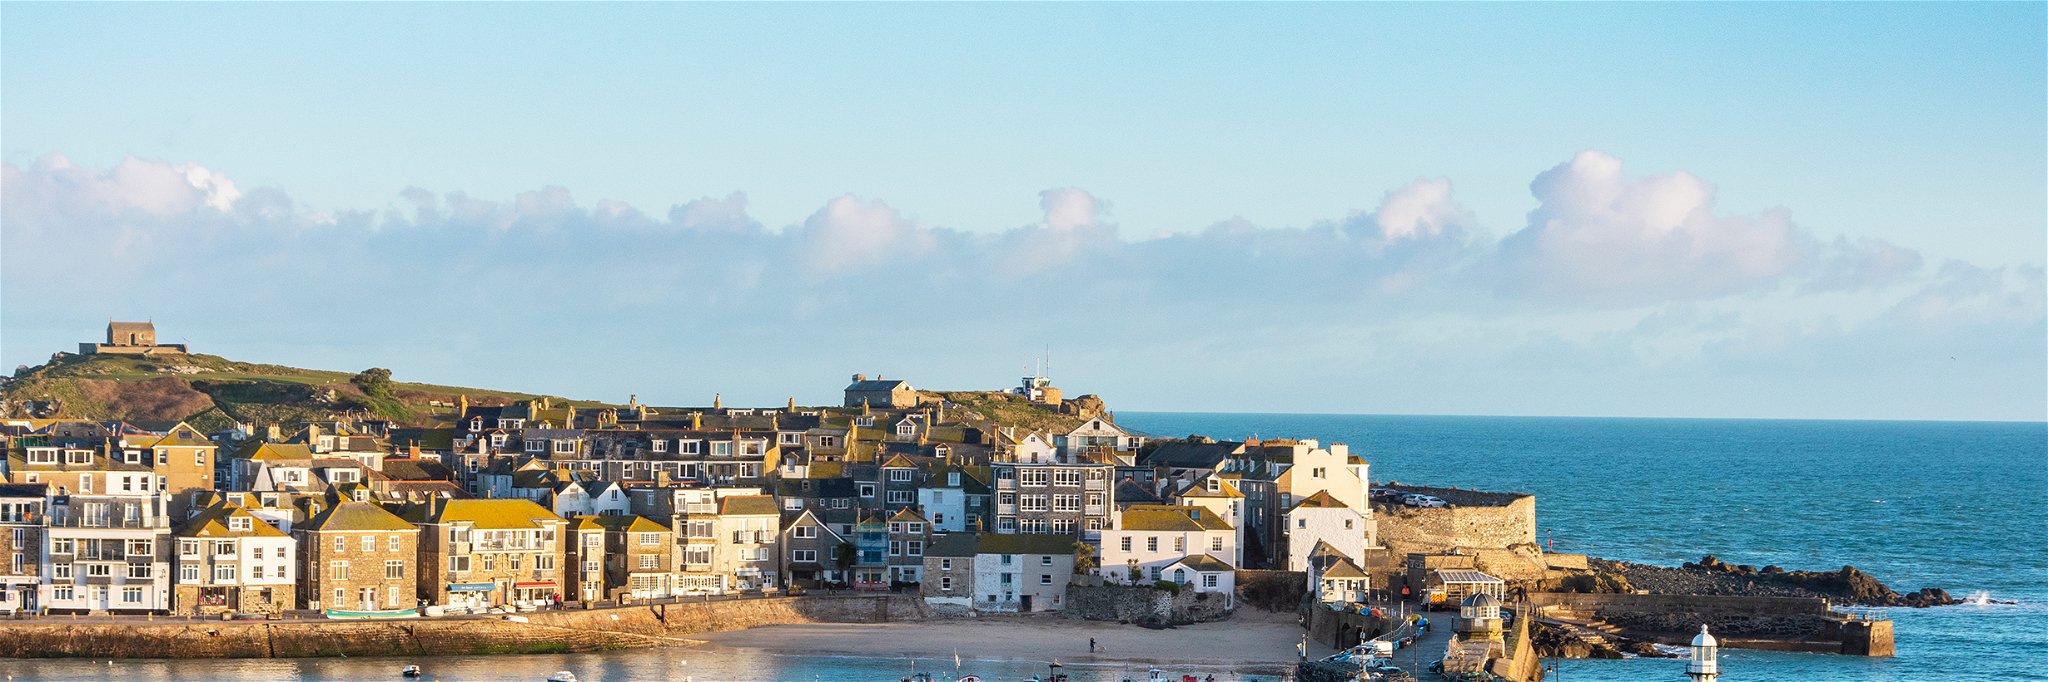 St Ives, Cornwall, may be a happy place to live but it is not cheap.